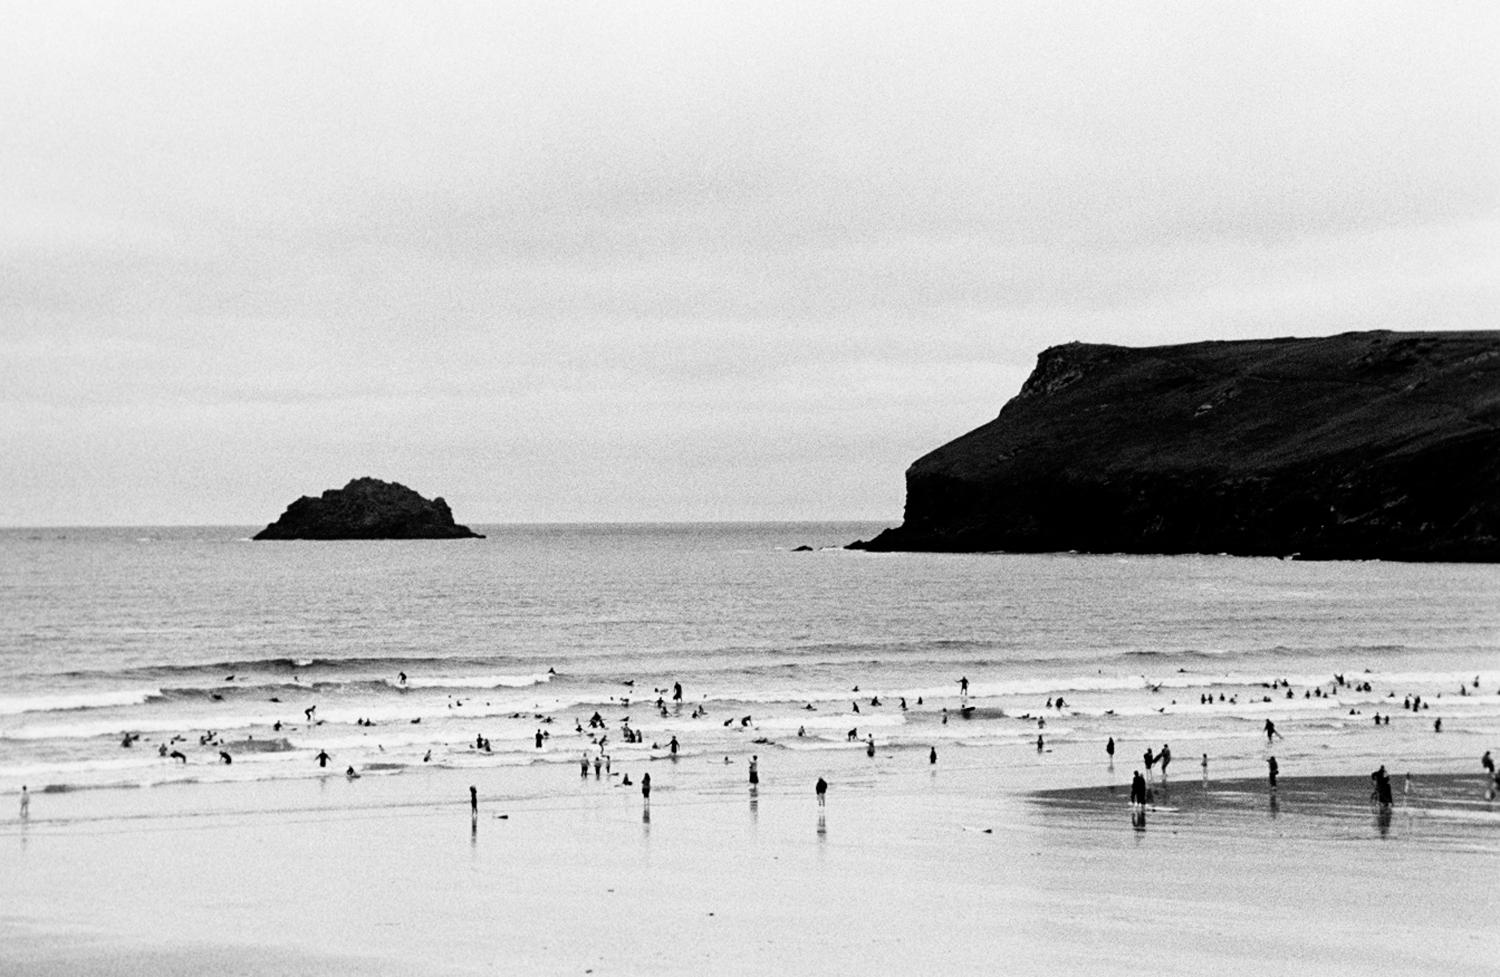 Robin Rice Black and White Photograph - Tiny Surfers in the Celtic Sea, Polzeath, England, UK, 2010